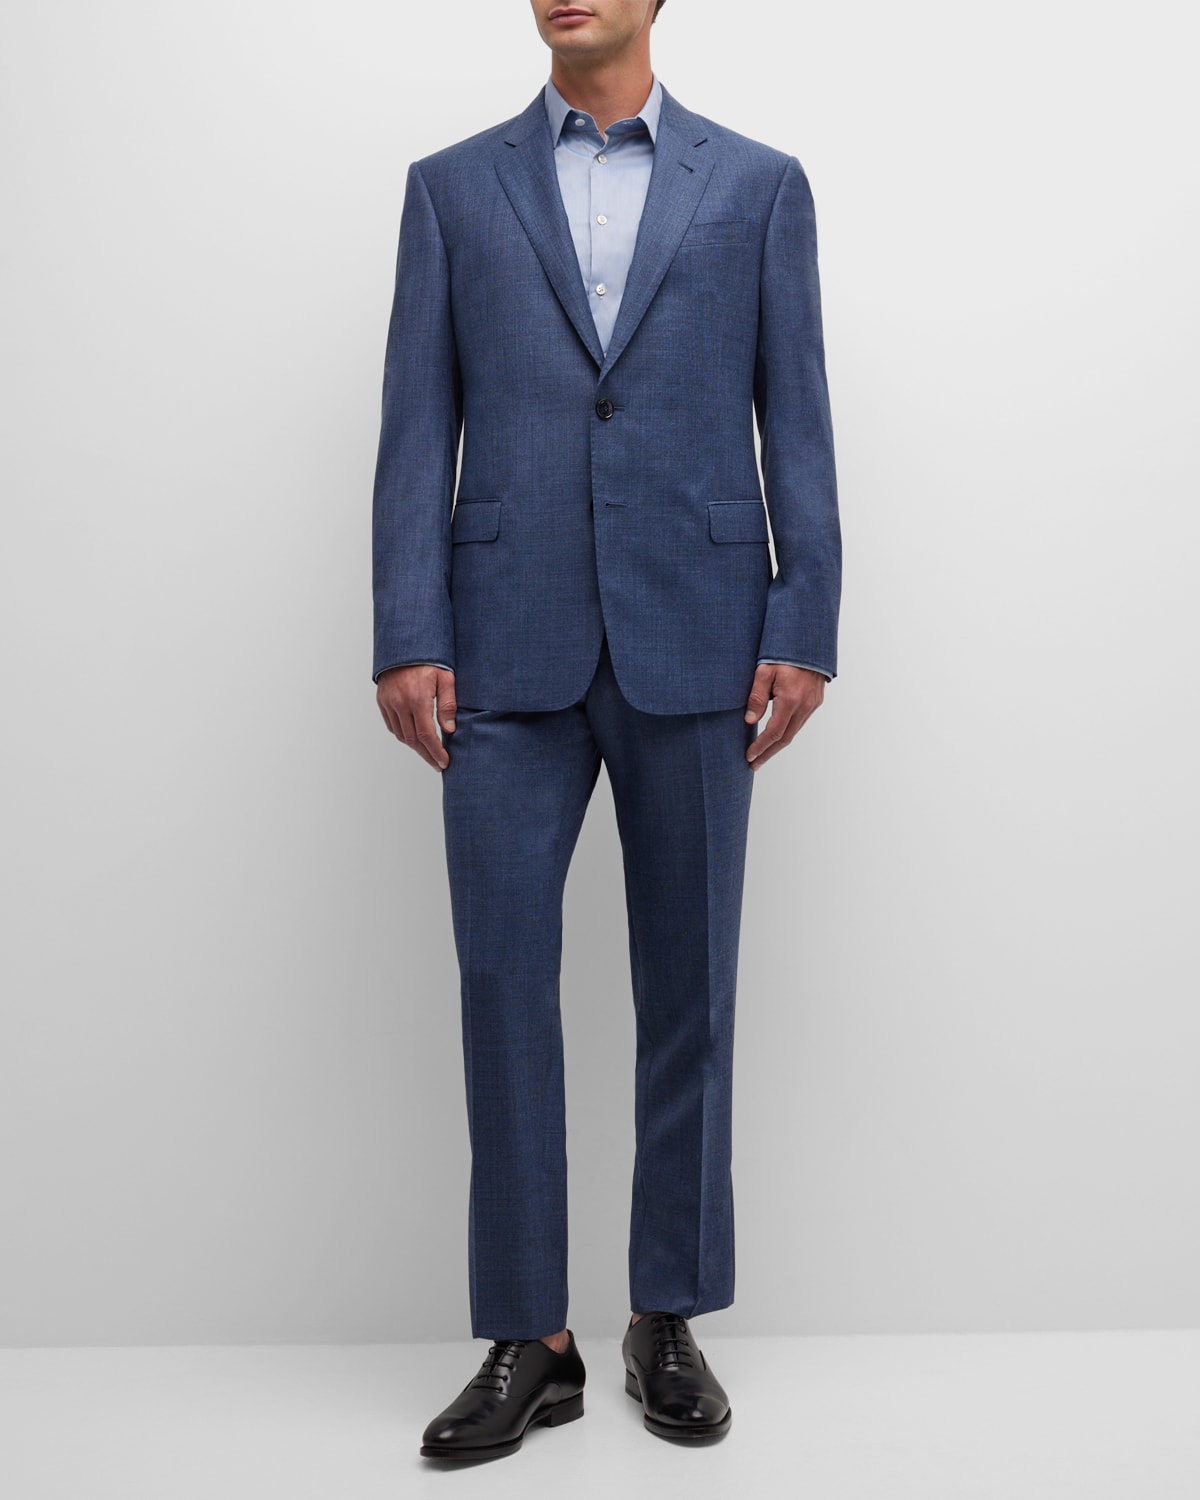 Giorgio Armani Men's Wool Single-breasted Suit In Blue Grey